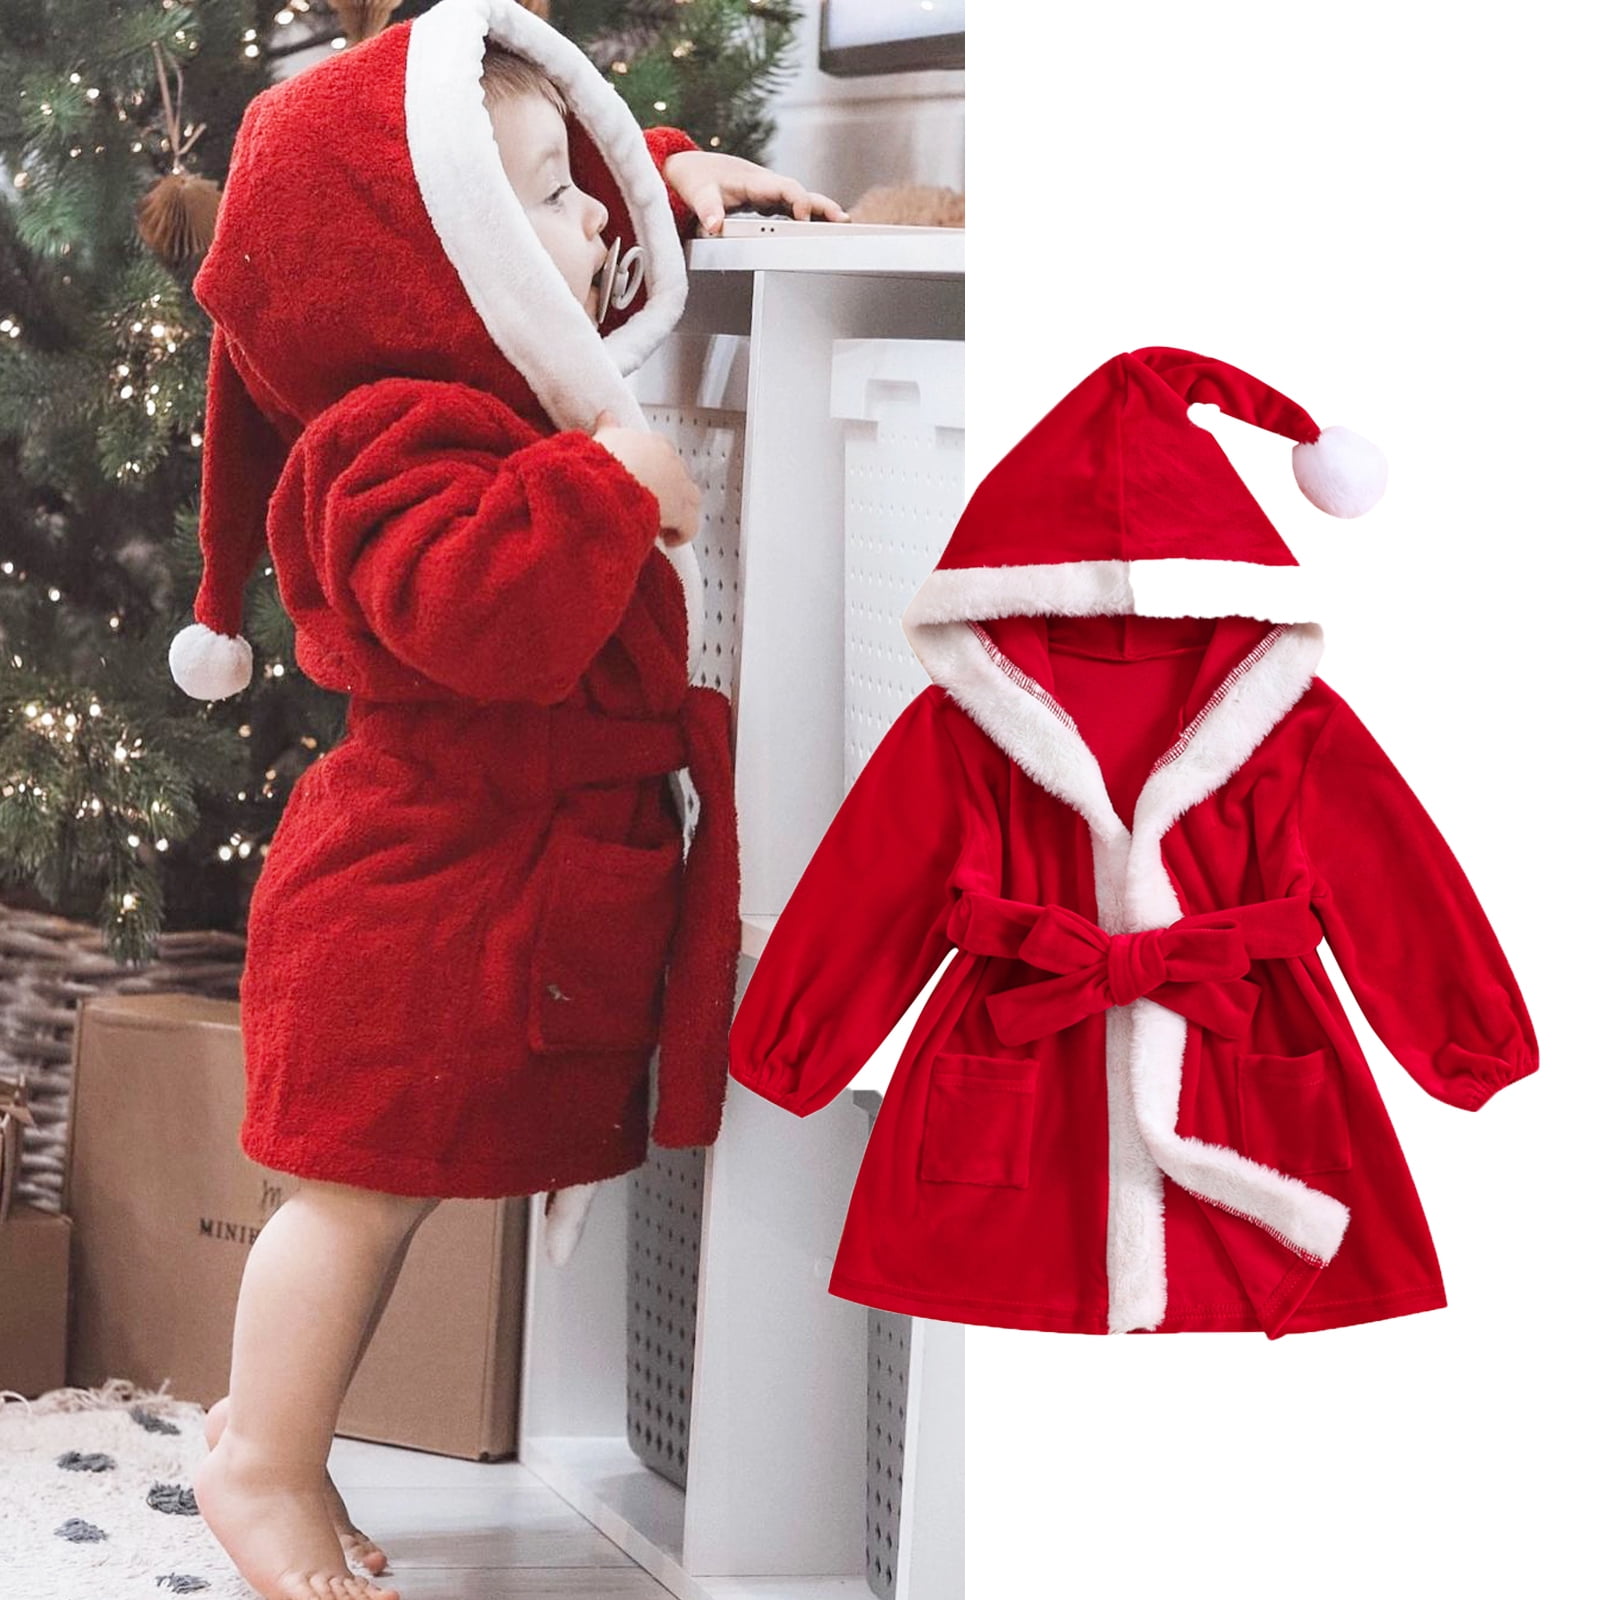 Hugsandcuddles Girl Boy Dressing Gown Pattern / Robe Pattern Pdf Sewing,  Toddler Dressing Gown / Robe 12 Months up to 10 Years - Etsy